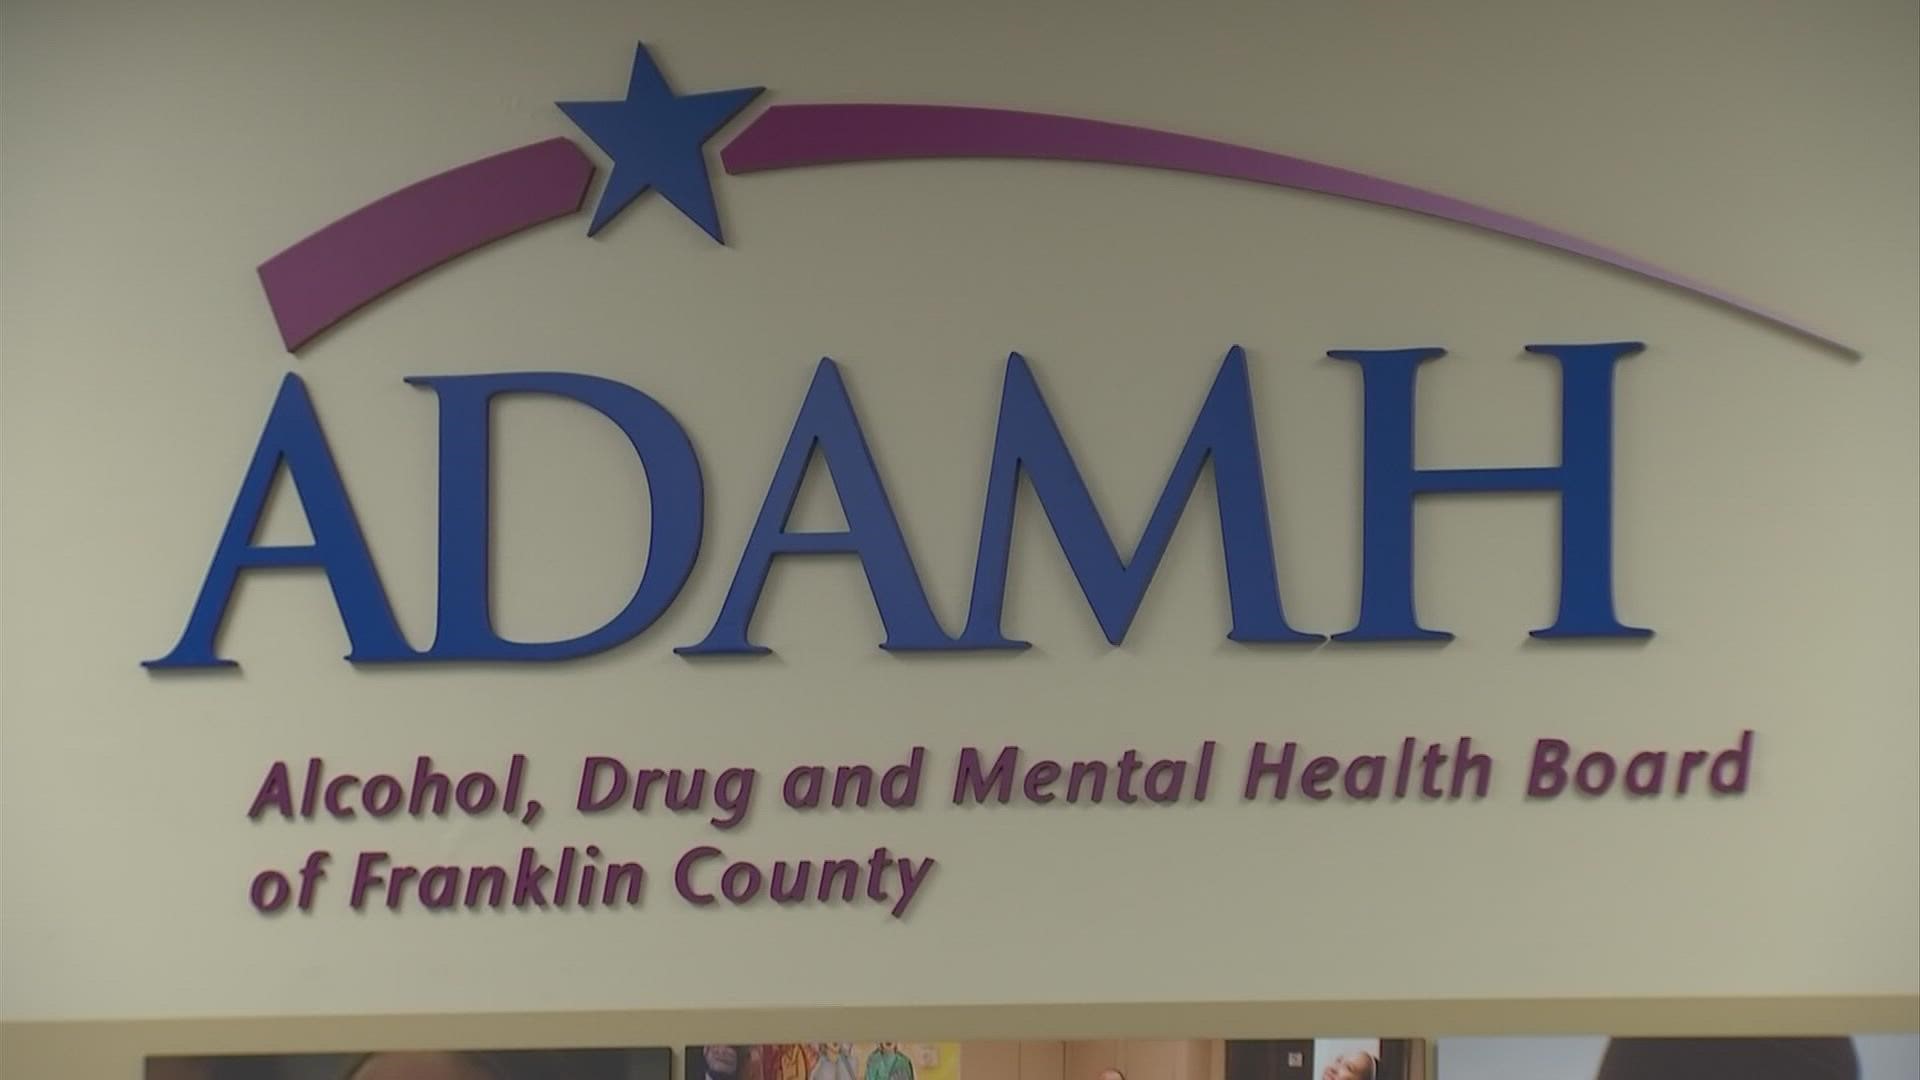 It’s the first crisis center in central Ohio to help those with mental illness and addiction issues.